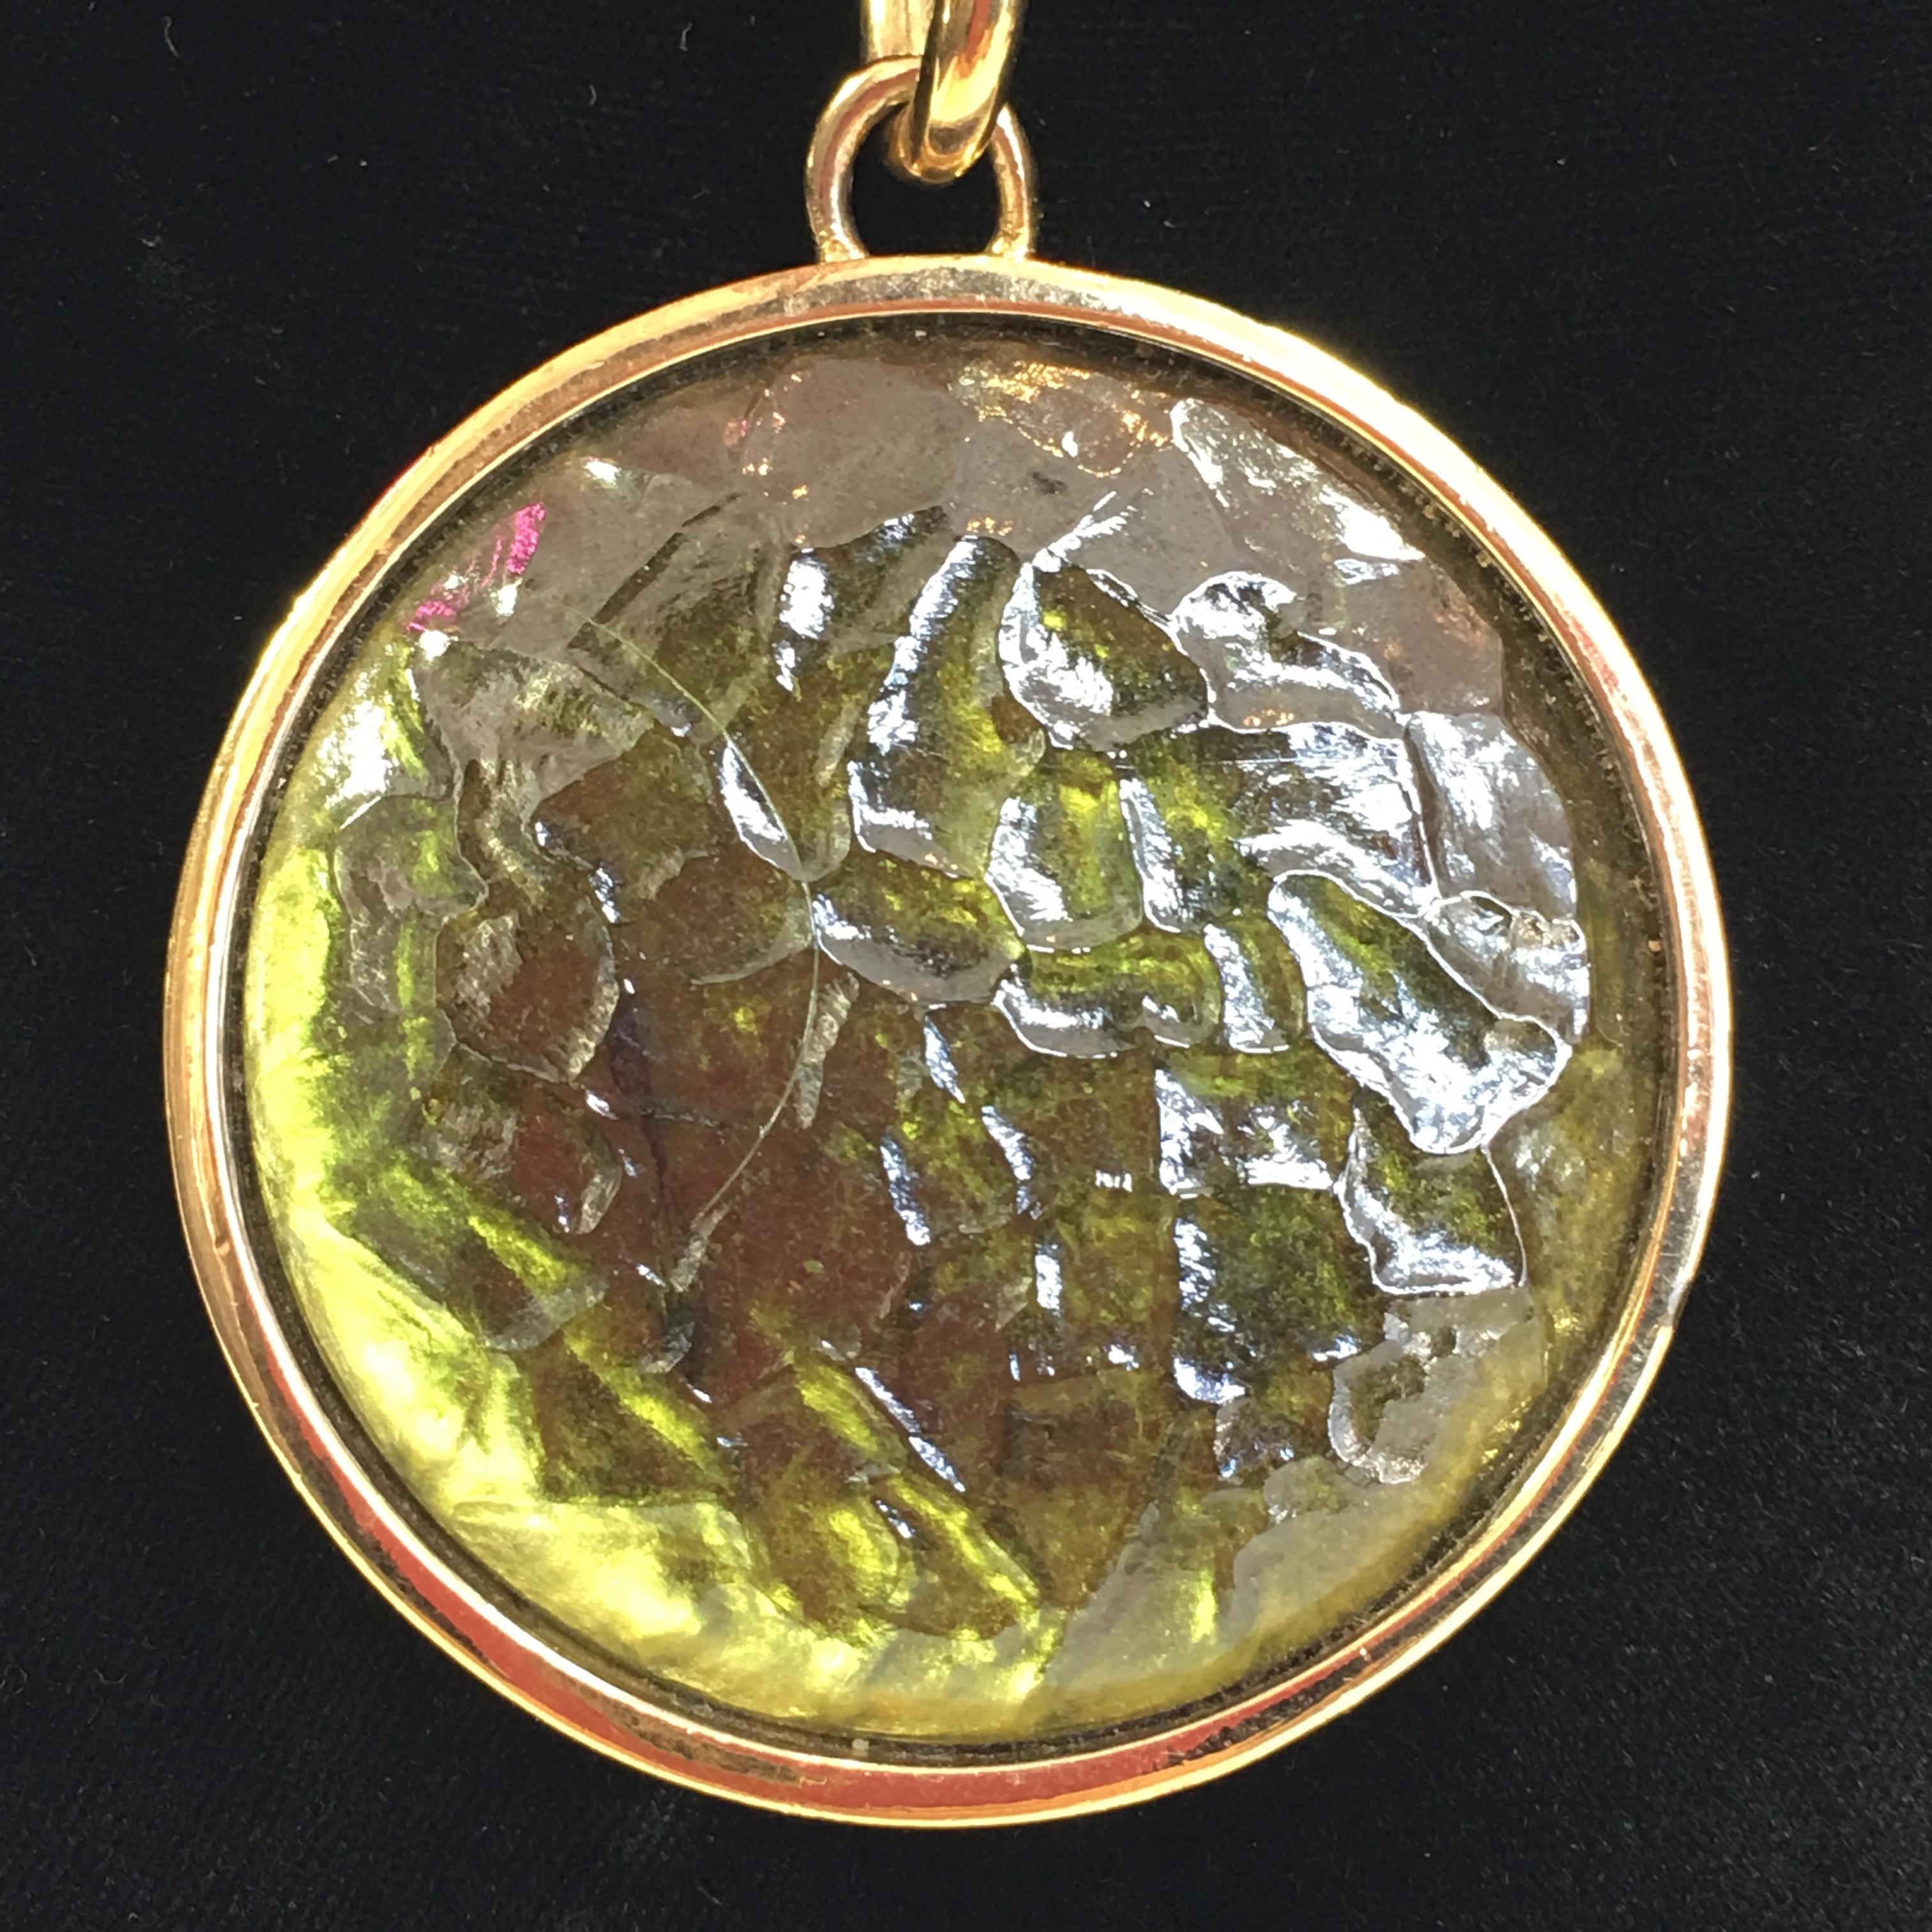 Givenchy Green Textured Art Glass Pendant with Monet Box Chain. Pendant is set in a gold plated casing.  Givenchy logo is stamped  on back of pendant. Monet box chain has Monet logo at back neck clasp.
Good vintage condition.

Measurements are as